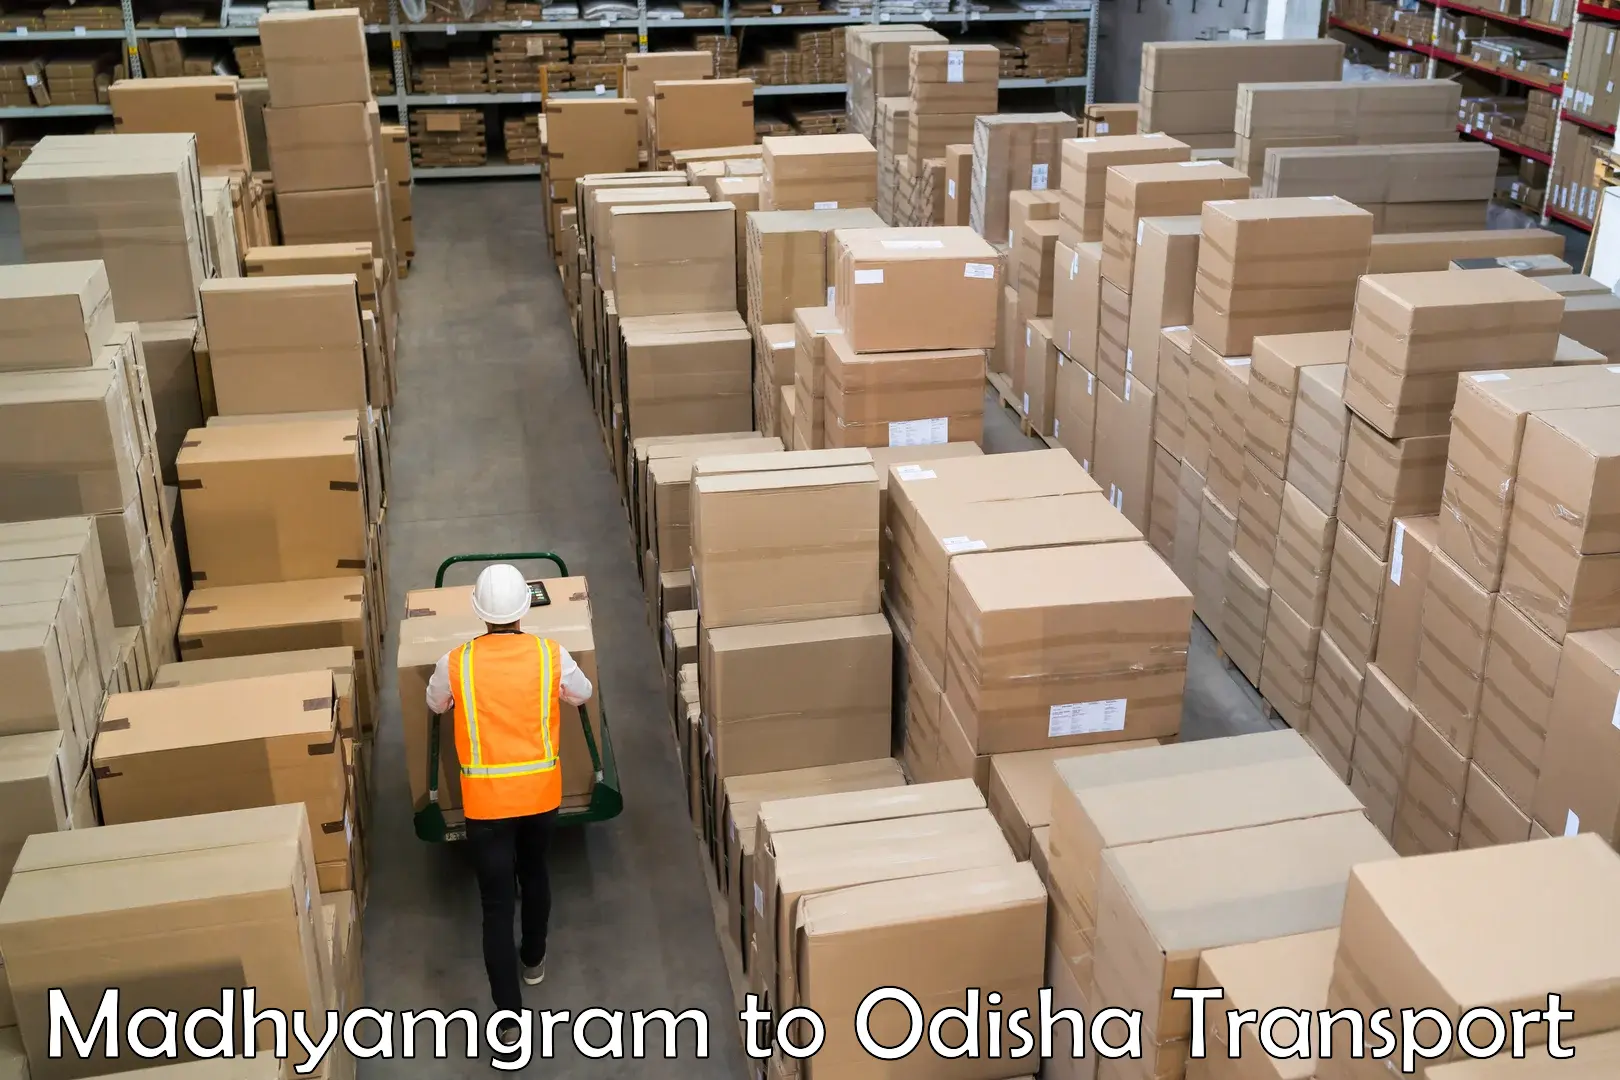 Air freight transport services in Madhyamgram to Bhuban